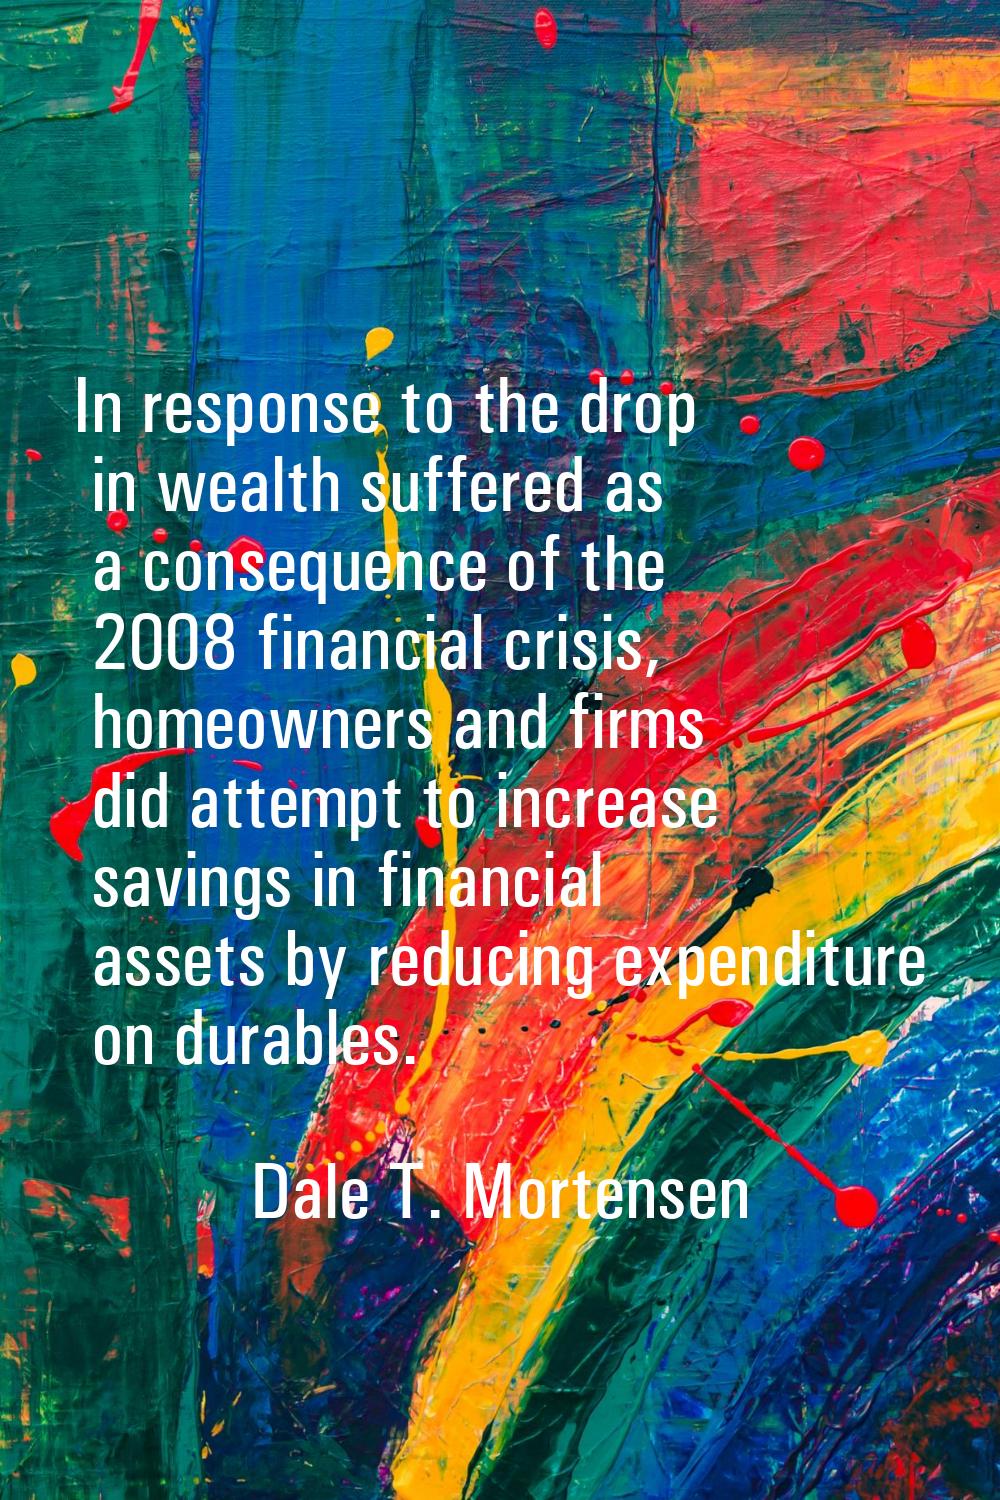 In response to the drop in wealth suffered as a consequence of the 2008 financial crisis, homeowner